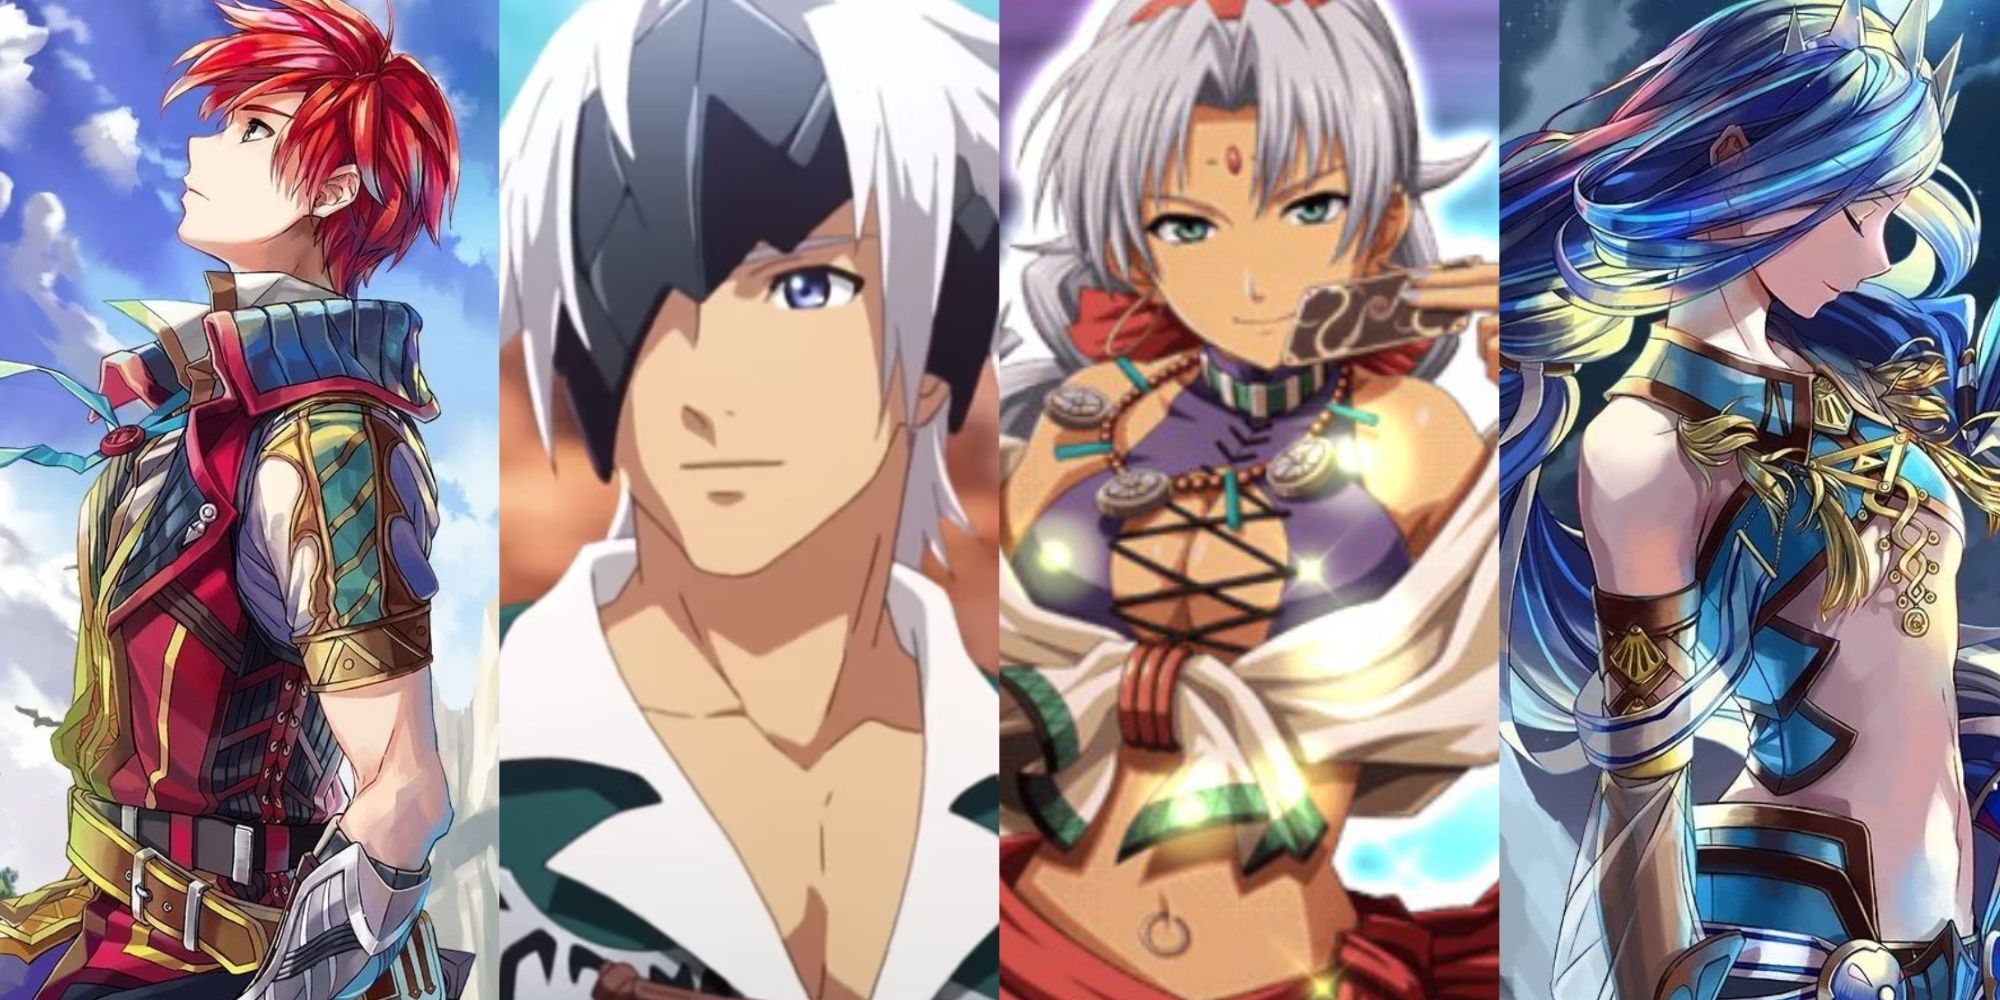 A collage of images showcasing characters from several games. On the far left is Adol Christin from Ys 8: Lacrimosa of Dana staring out into the open sea. Right beside him is Alphen from Tales of Arise, smiling and staring ahead. Beside him is Scherazard Harvey from The Legend of Heroes: Trials in the Sky FC Evolution, smiling and holding a card in one hand. Beside her and on the far right is Dana from Ys 8: Lacrimosa of Dana to bookend the image, as she smiles with her eyes closed, with her hea